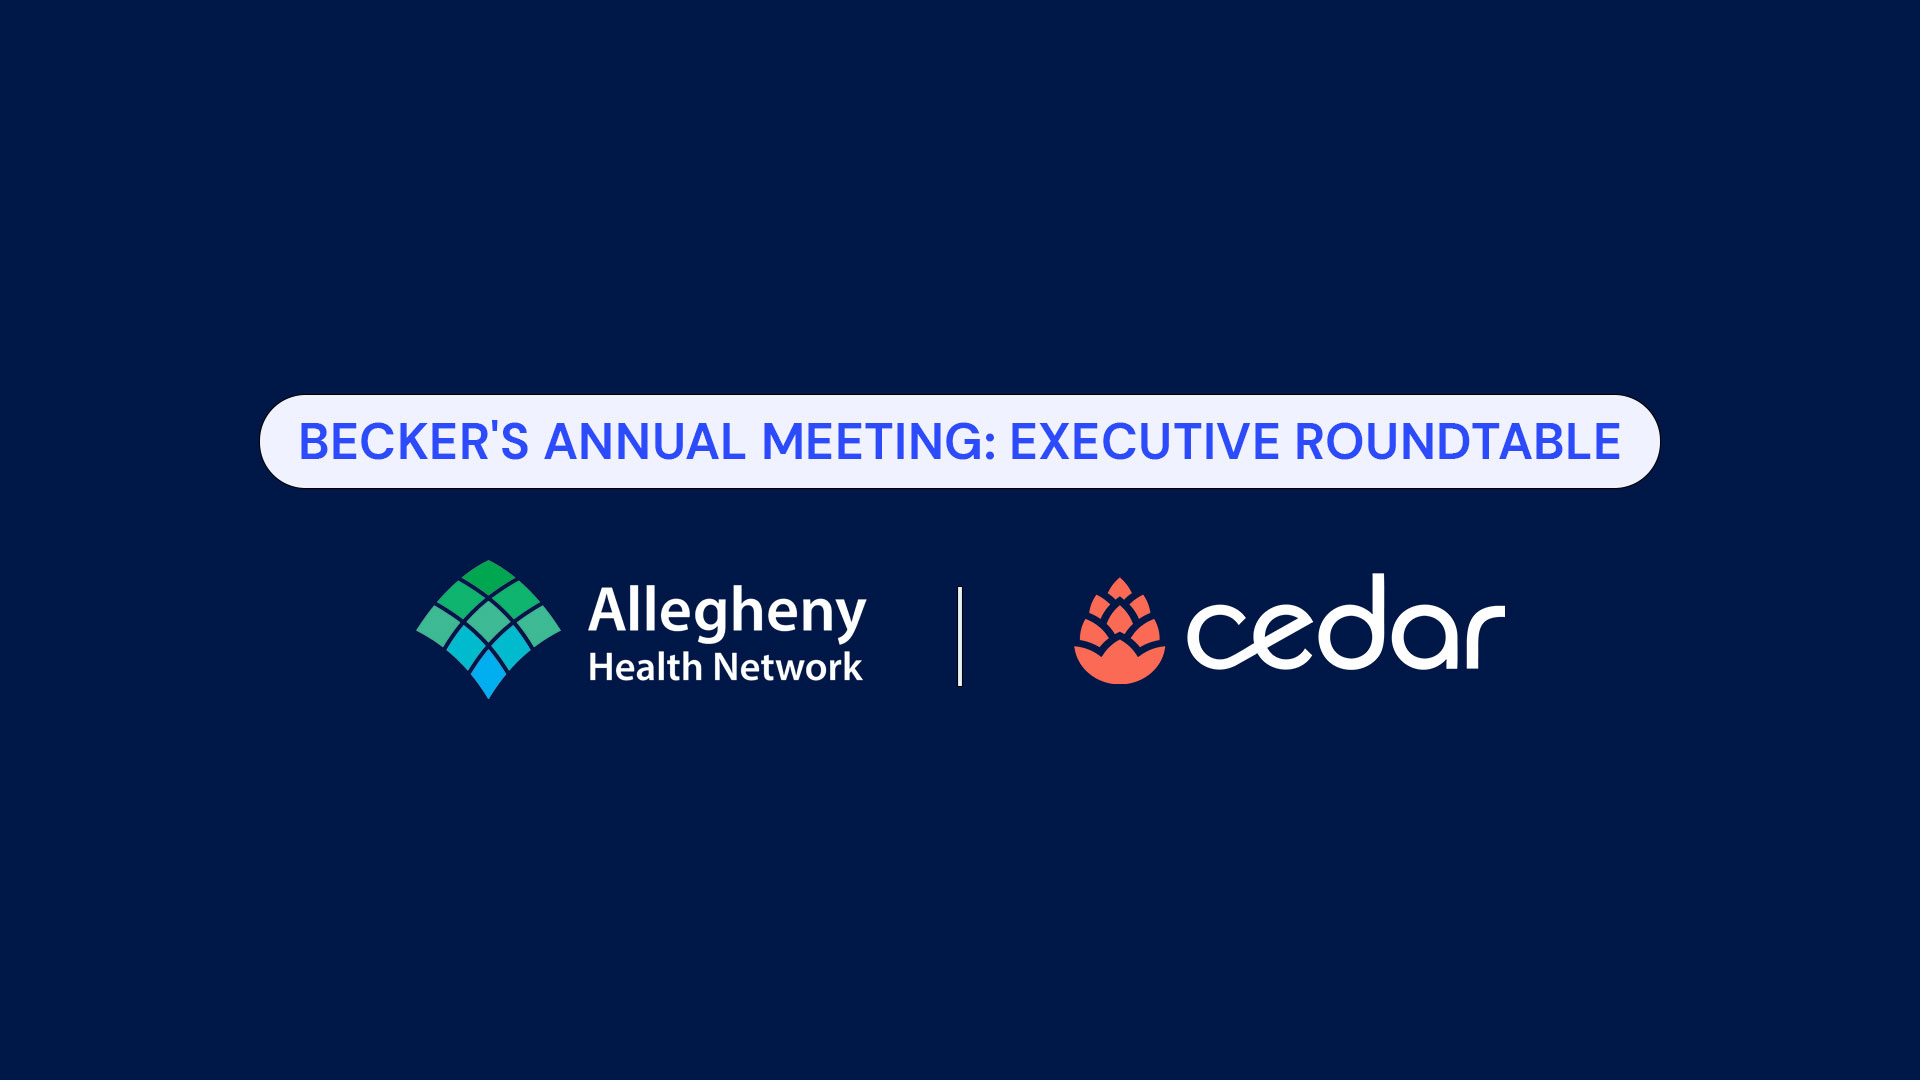 The Power of Payer-Provider Collaboration: Q&A with James Rohrbaugh, CFO of Allegheny Health Network